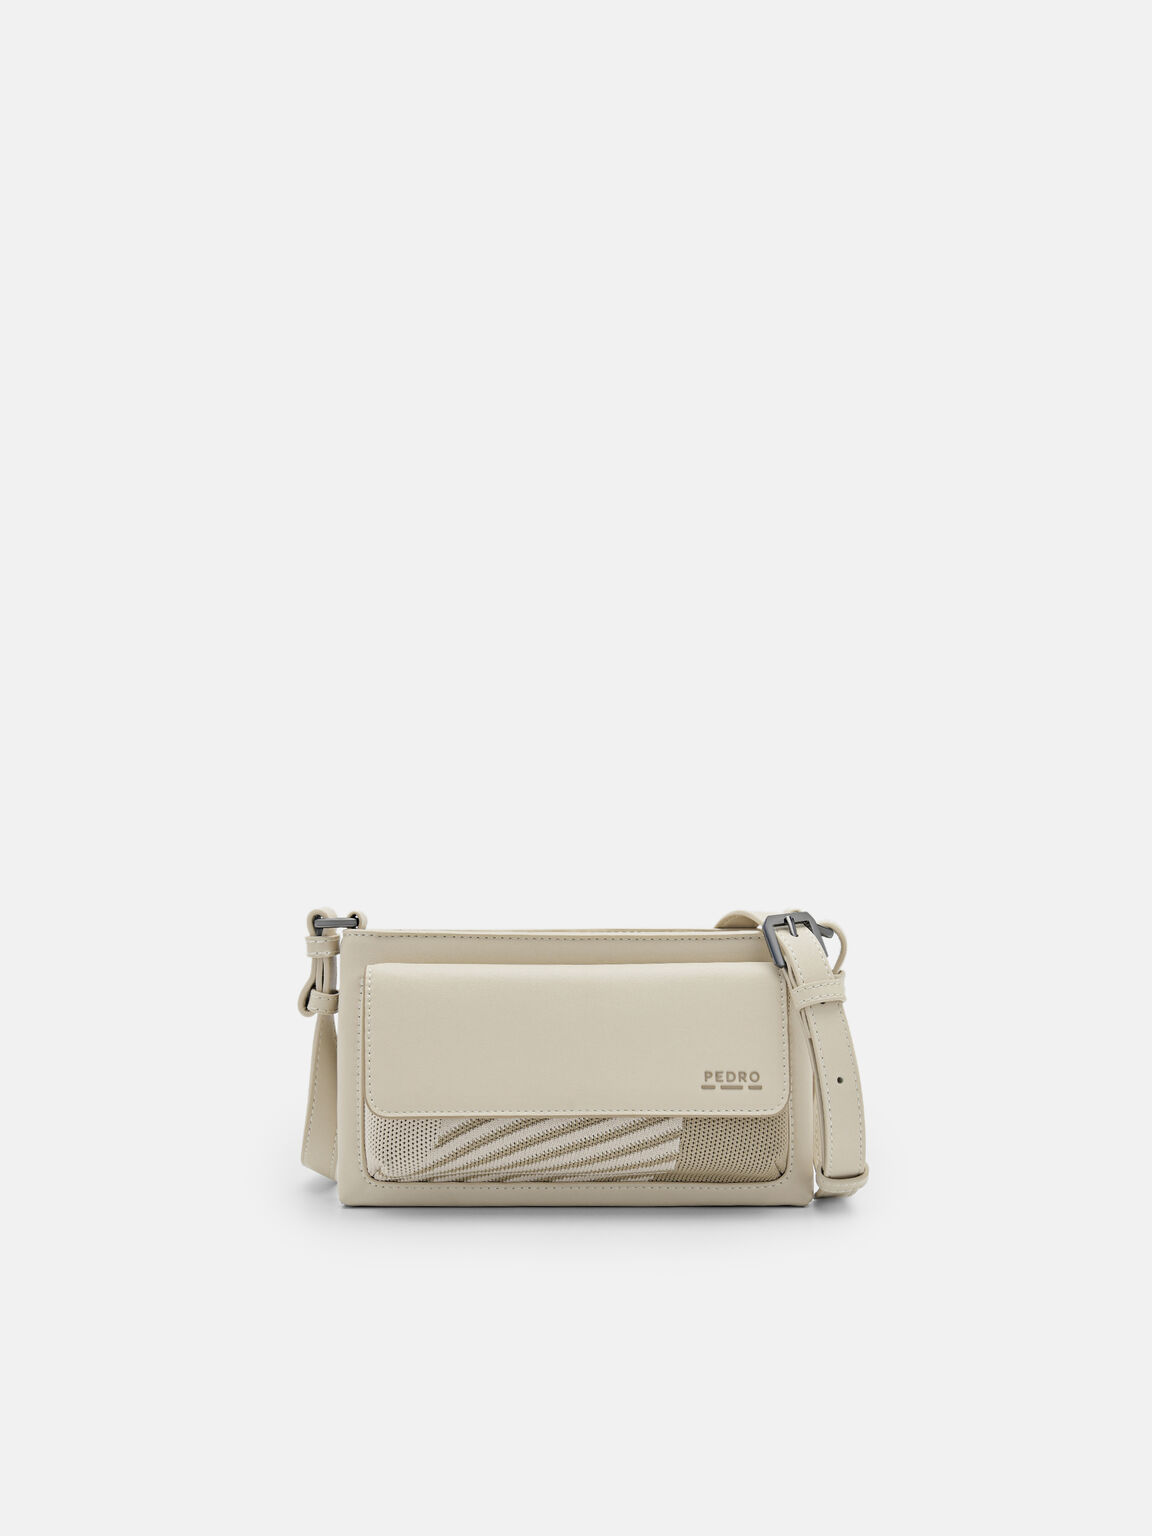 rePEDRO Recycled Leather Mini Sling Bag, Sand, hi-res